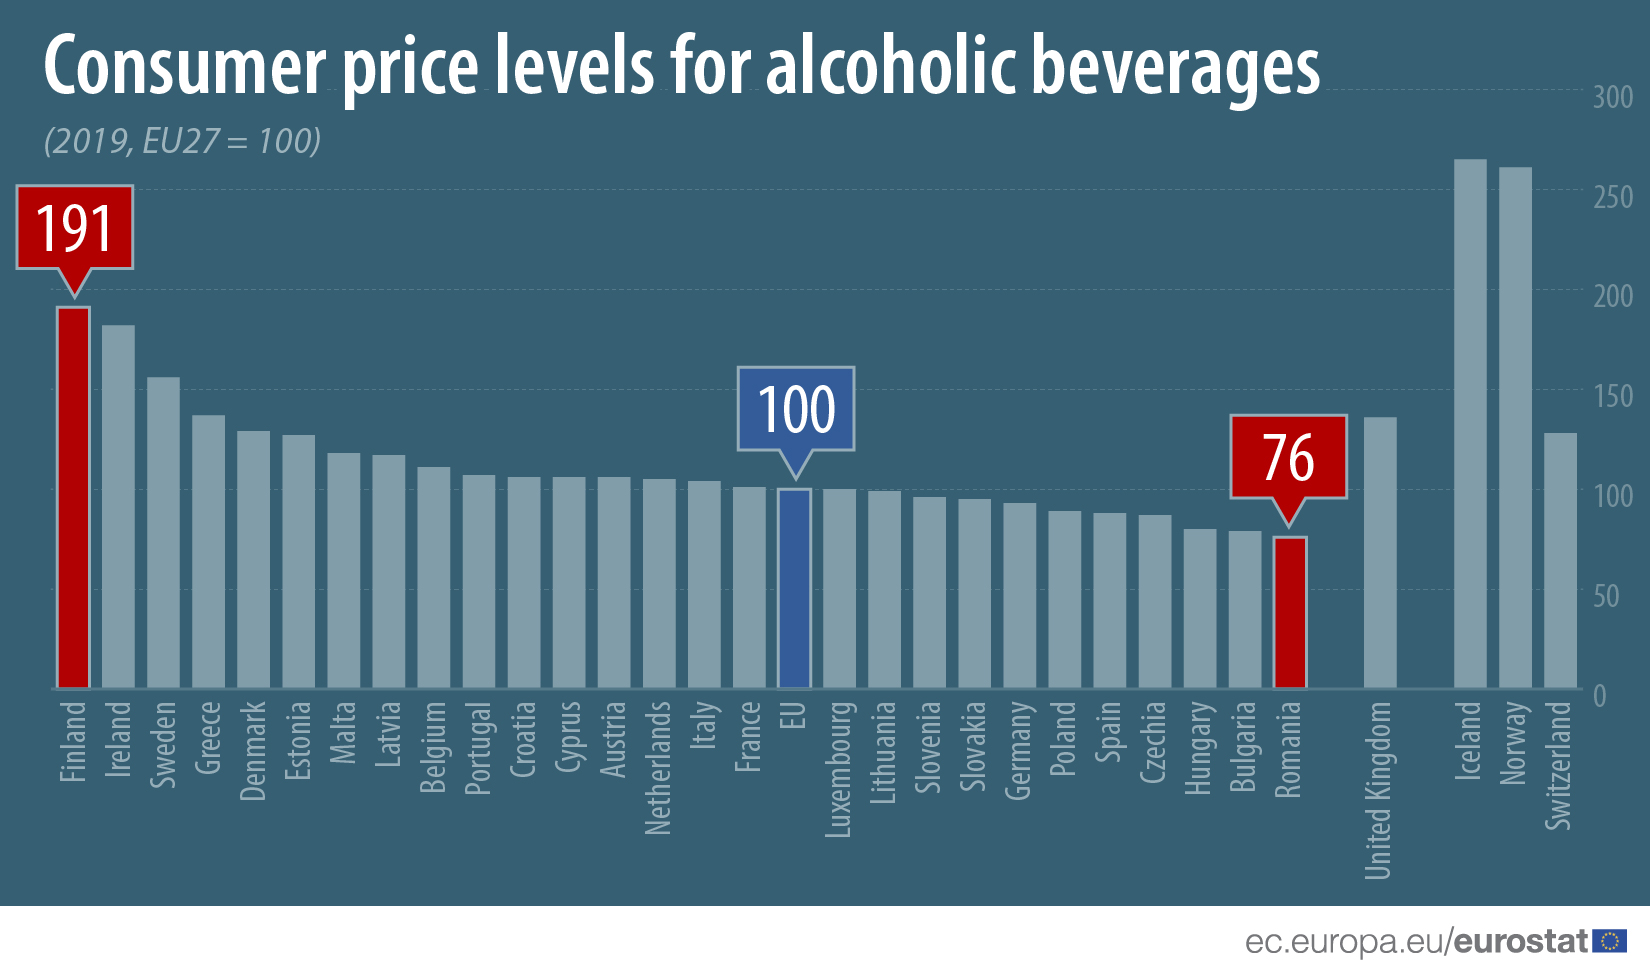 From Iceland - Alcohol prices higher in Iceland